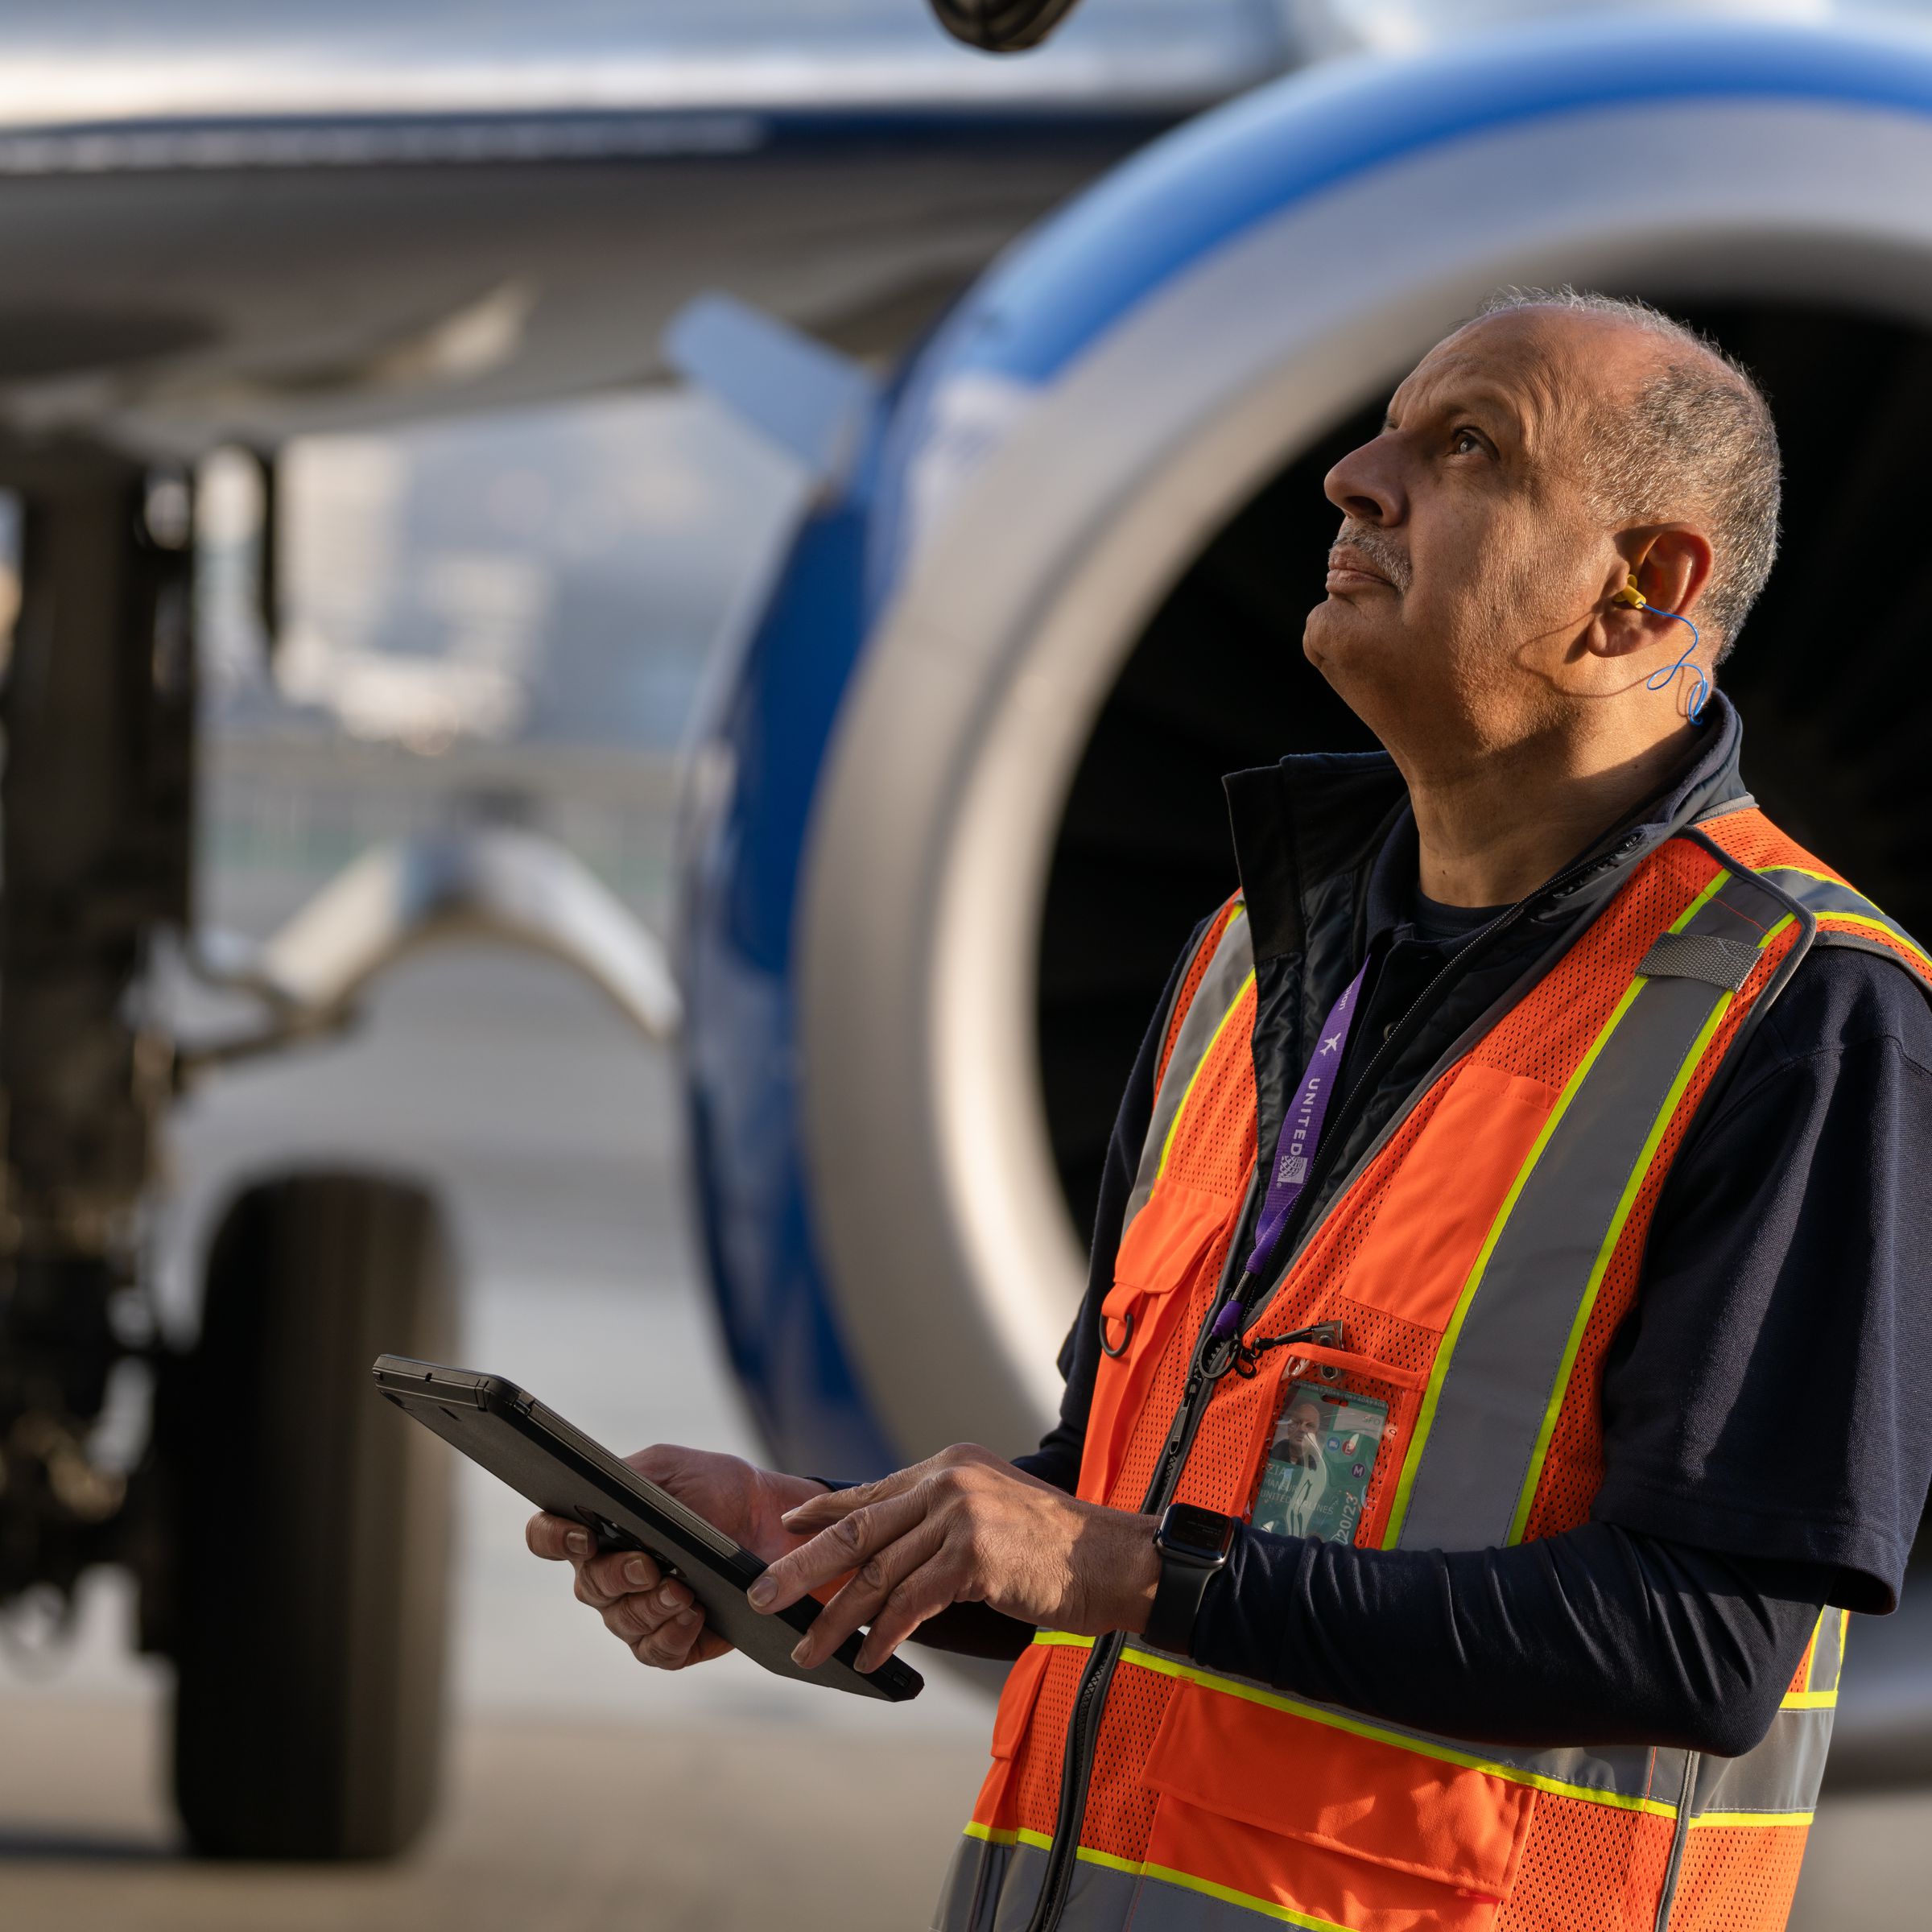 United lead line technician Mansur Zia observes the exterior of the plane and uses the iPad to create service tickets and perform a digital maintenance release sign-off.